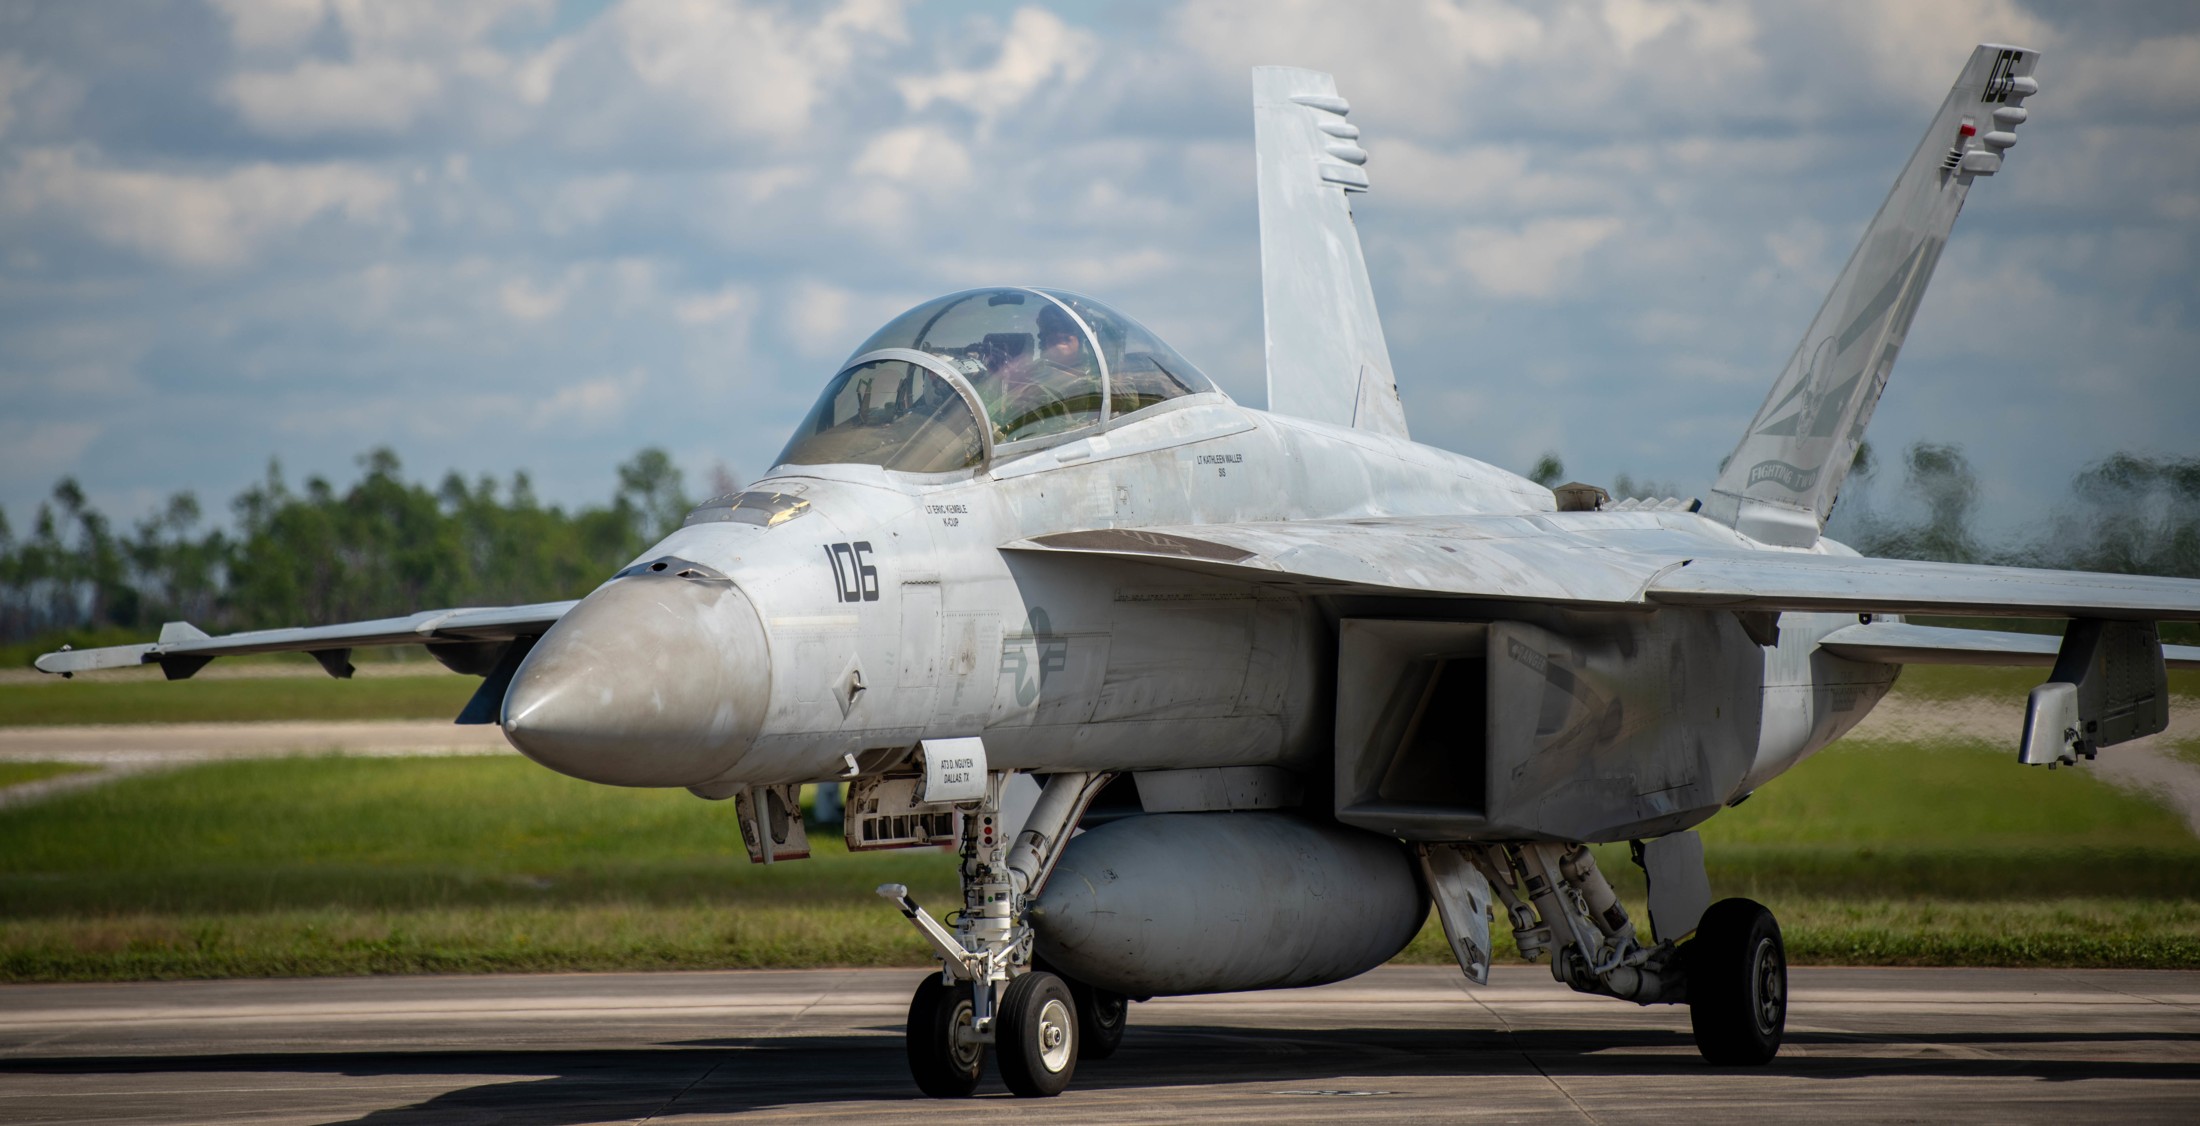 vfa-2 bounty hunters strike fighter squadron us navy f/a-18f super hornet tyndall afb florida wsep east 126